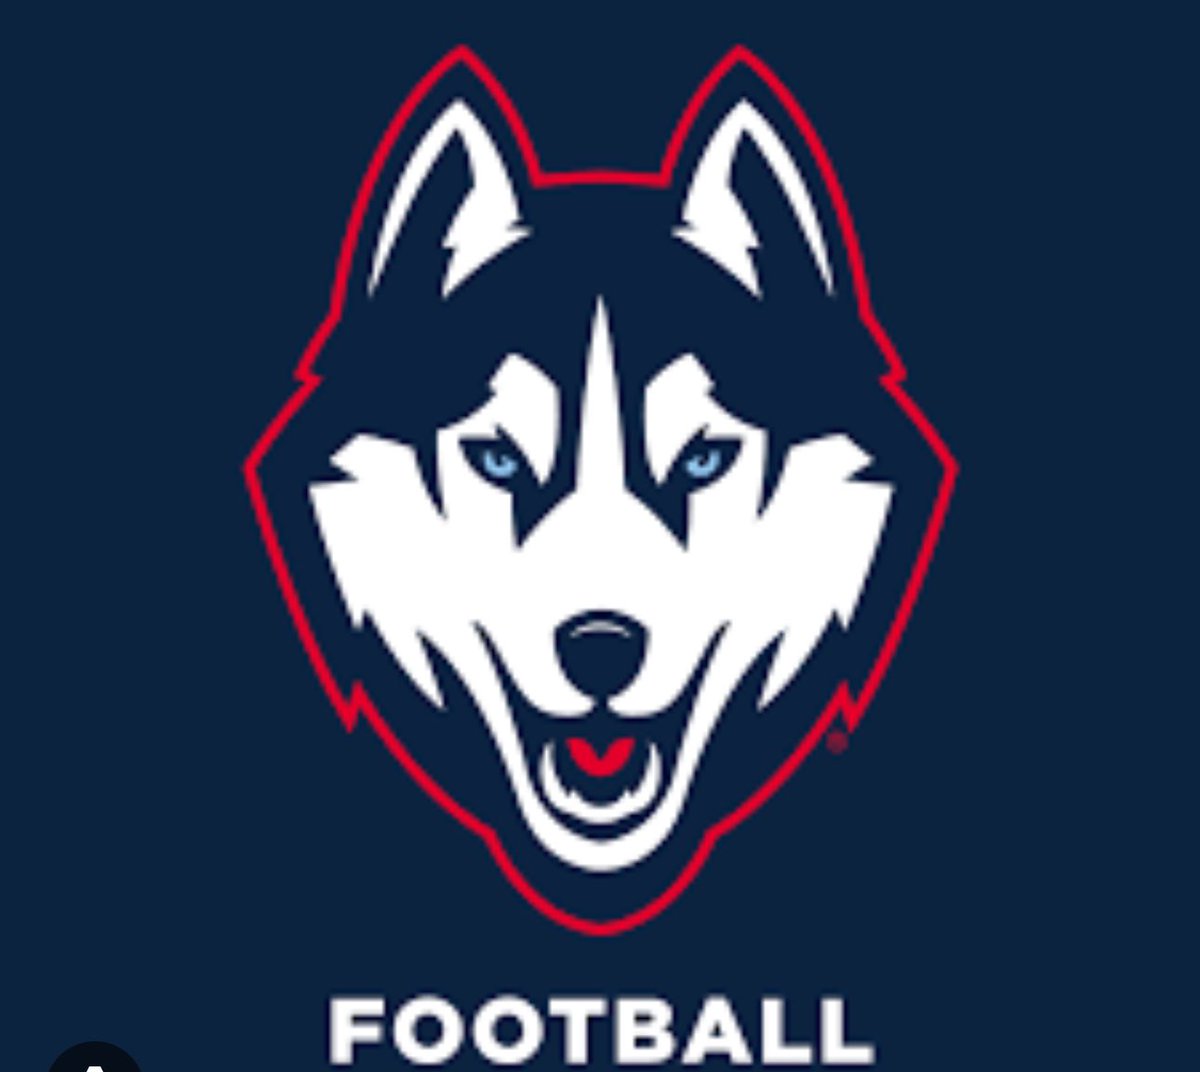 After a great conversation blessed to receive an offer from UConn!! @KashifMoore @UConnFootball